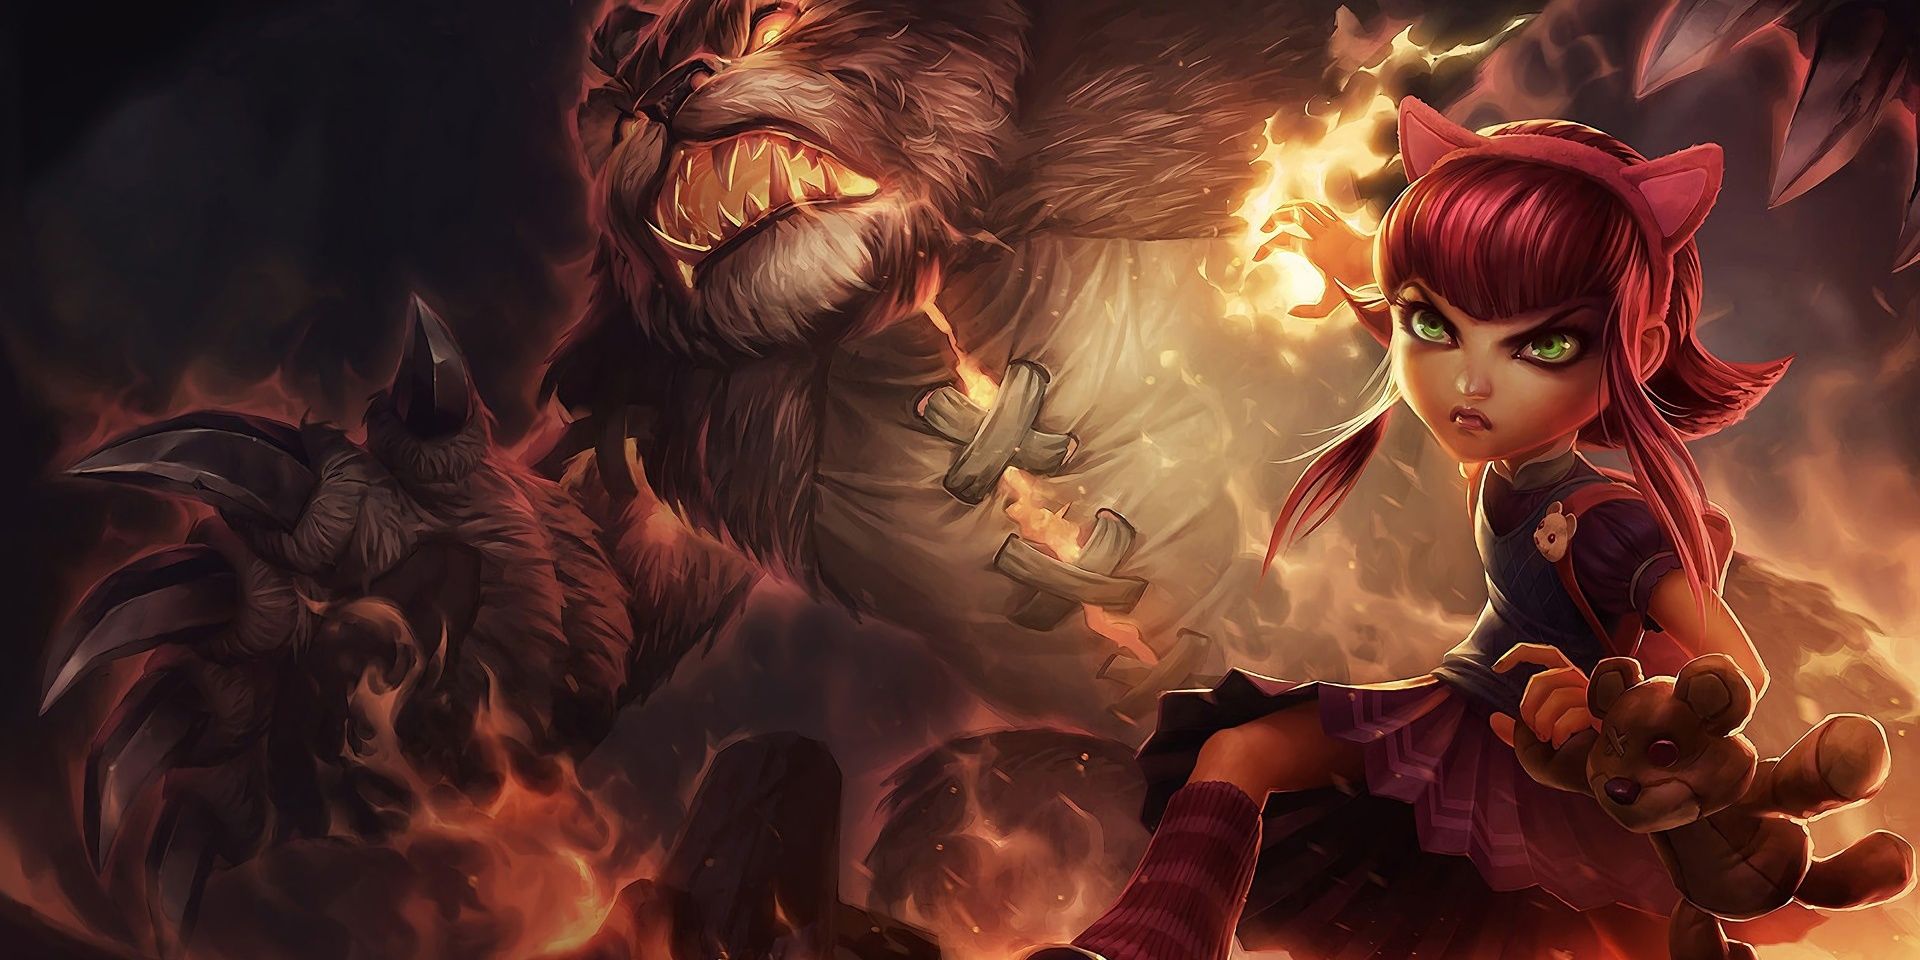 Annie With Fire Ball Summoning Tibbers